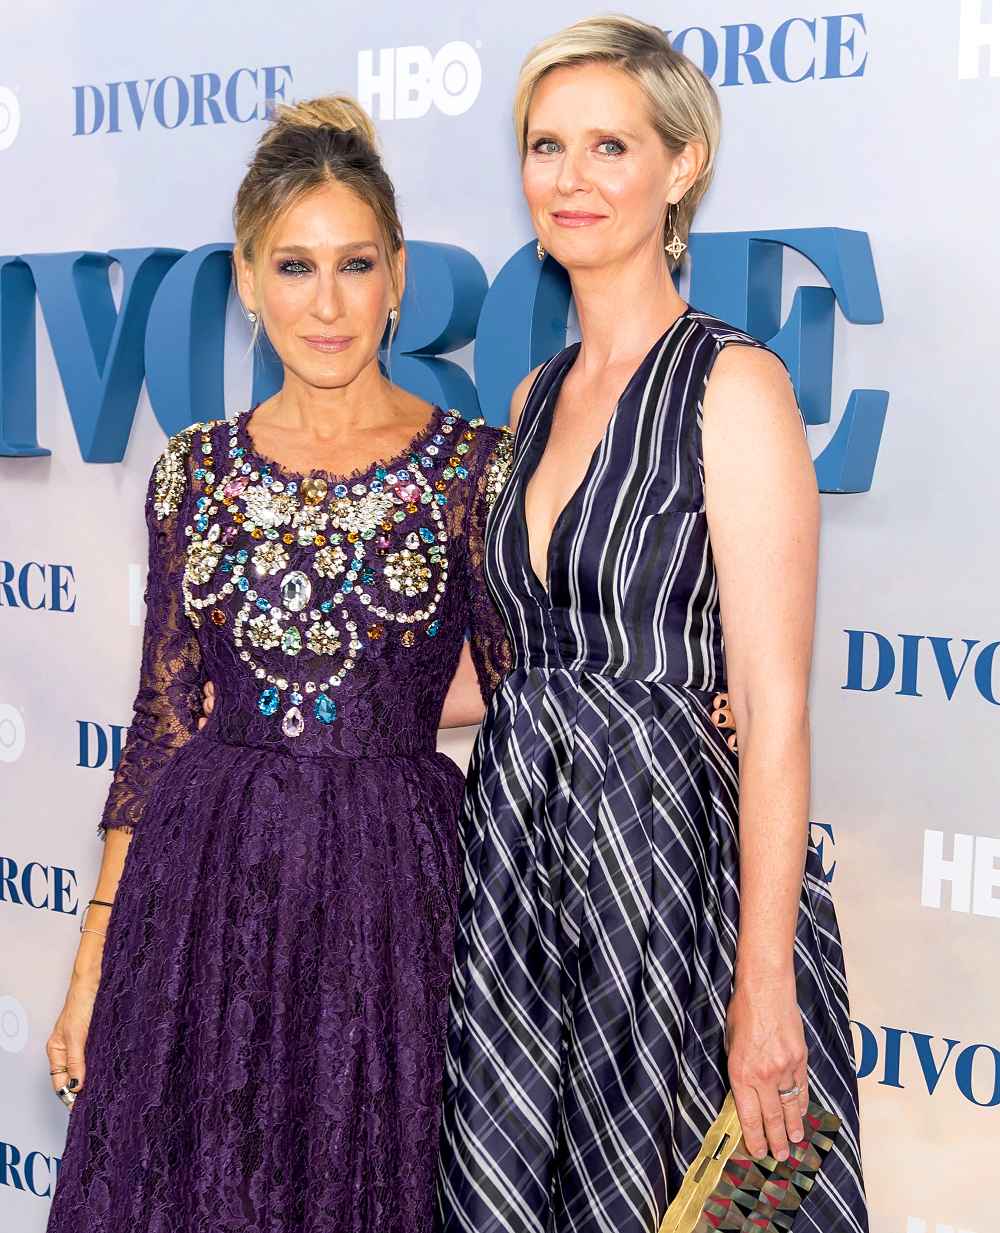 Sarah Jessica Parker and Cynthia Nixon attend the 'Divorce' New York Premiere at SVA Theater on October 4, 2016 in New York City.